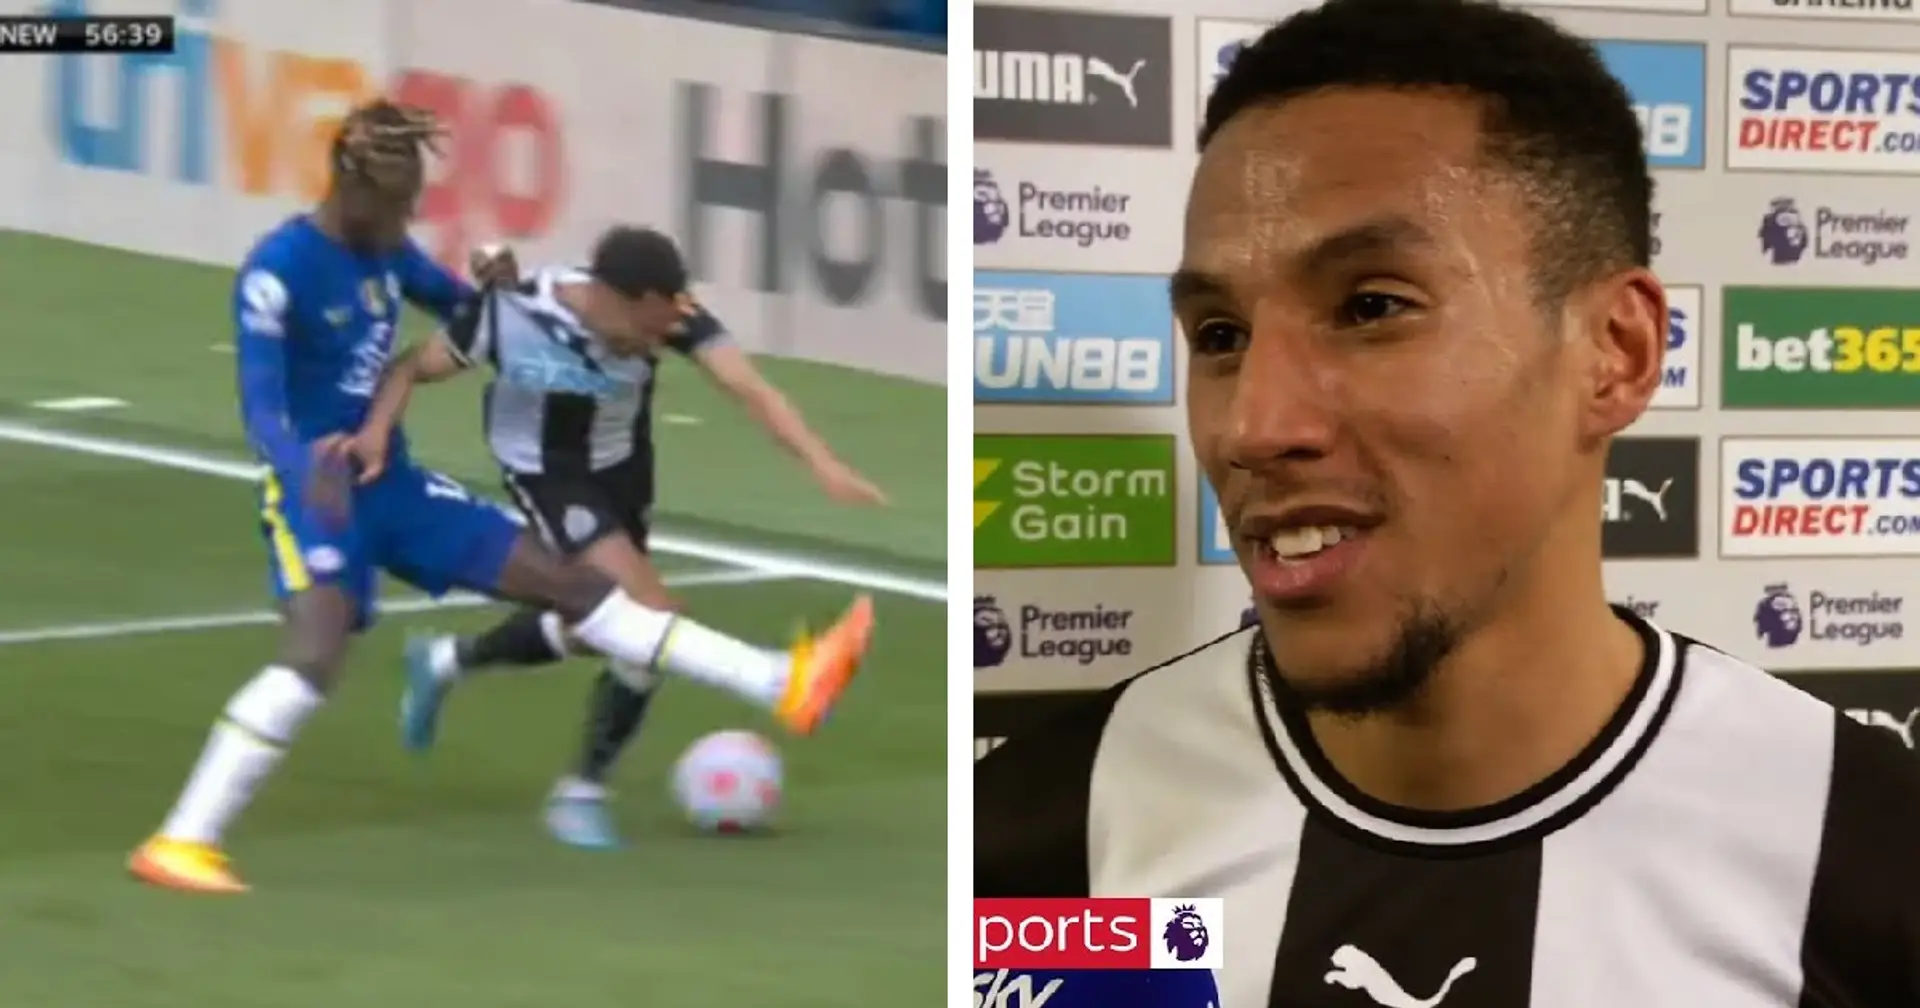 Isaac Hayden accuses referees of favouring Chelsea in defeat